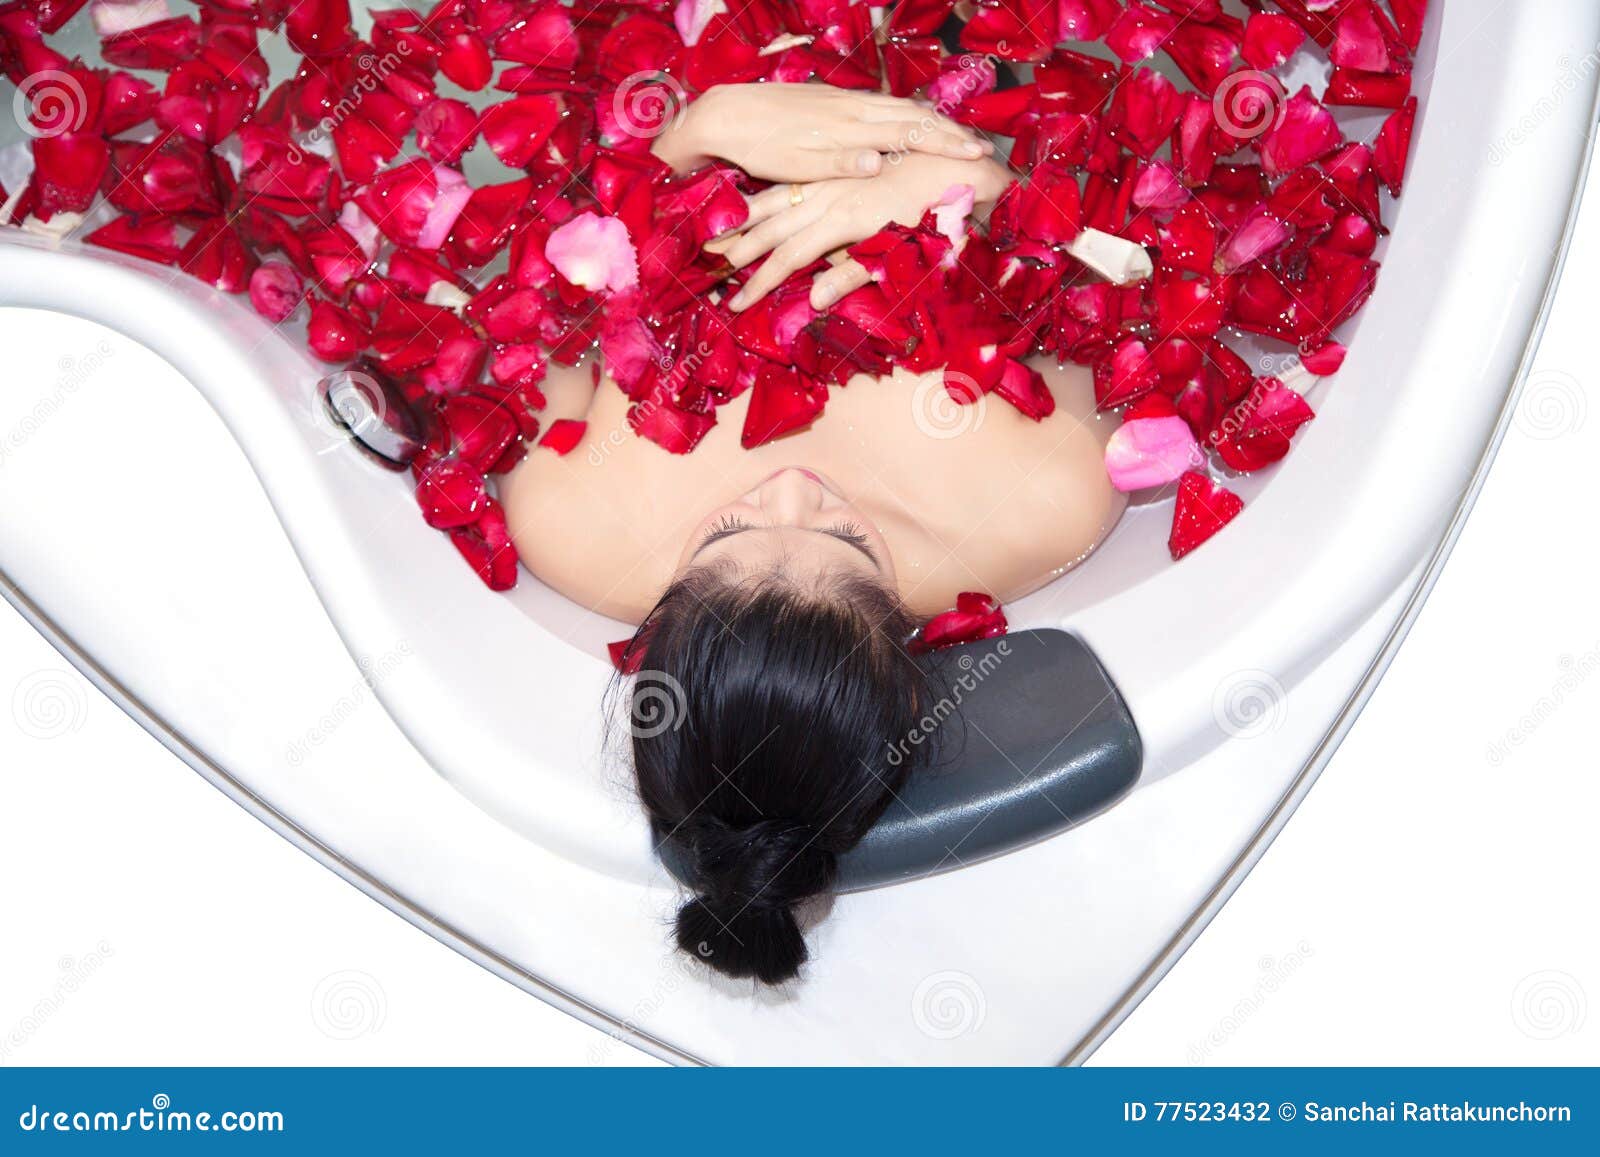 Jacuzzi rose petals in An Electrifying